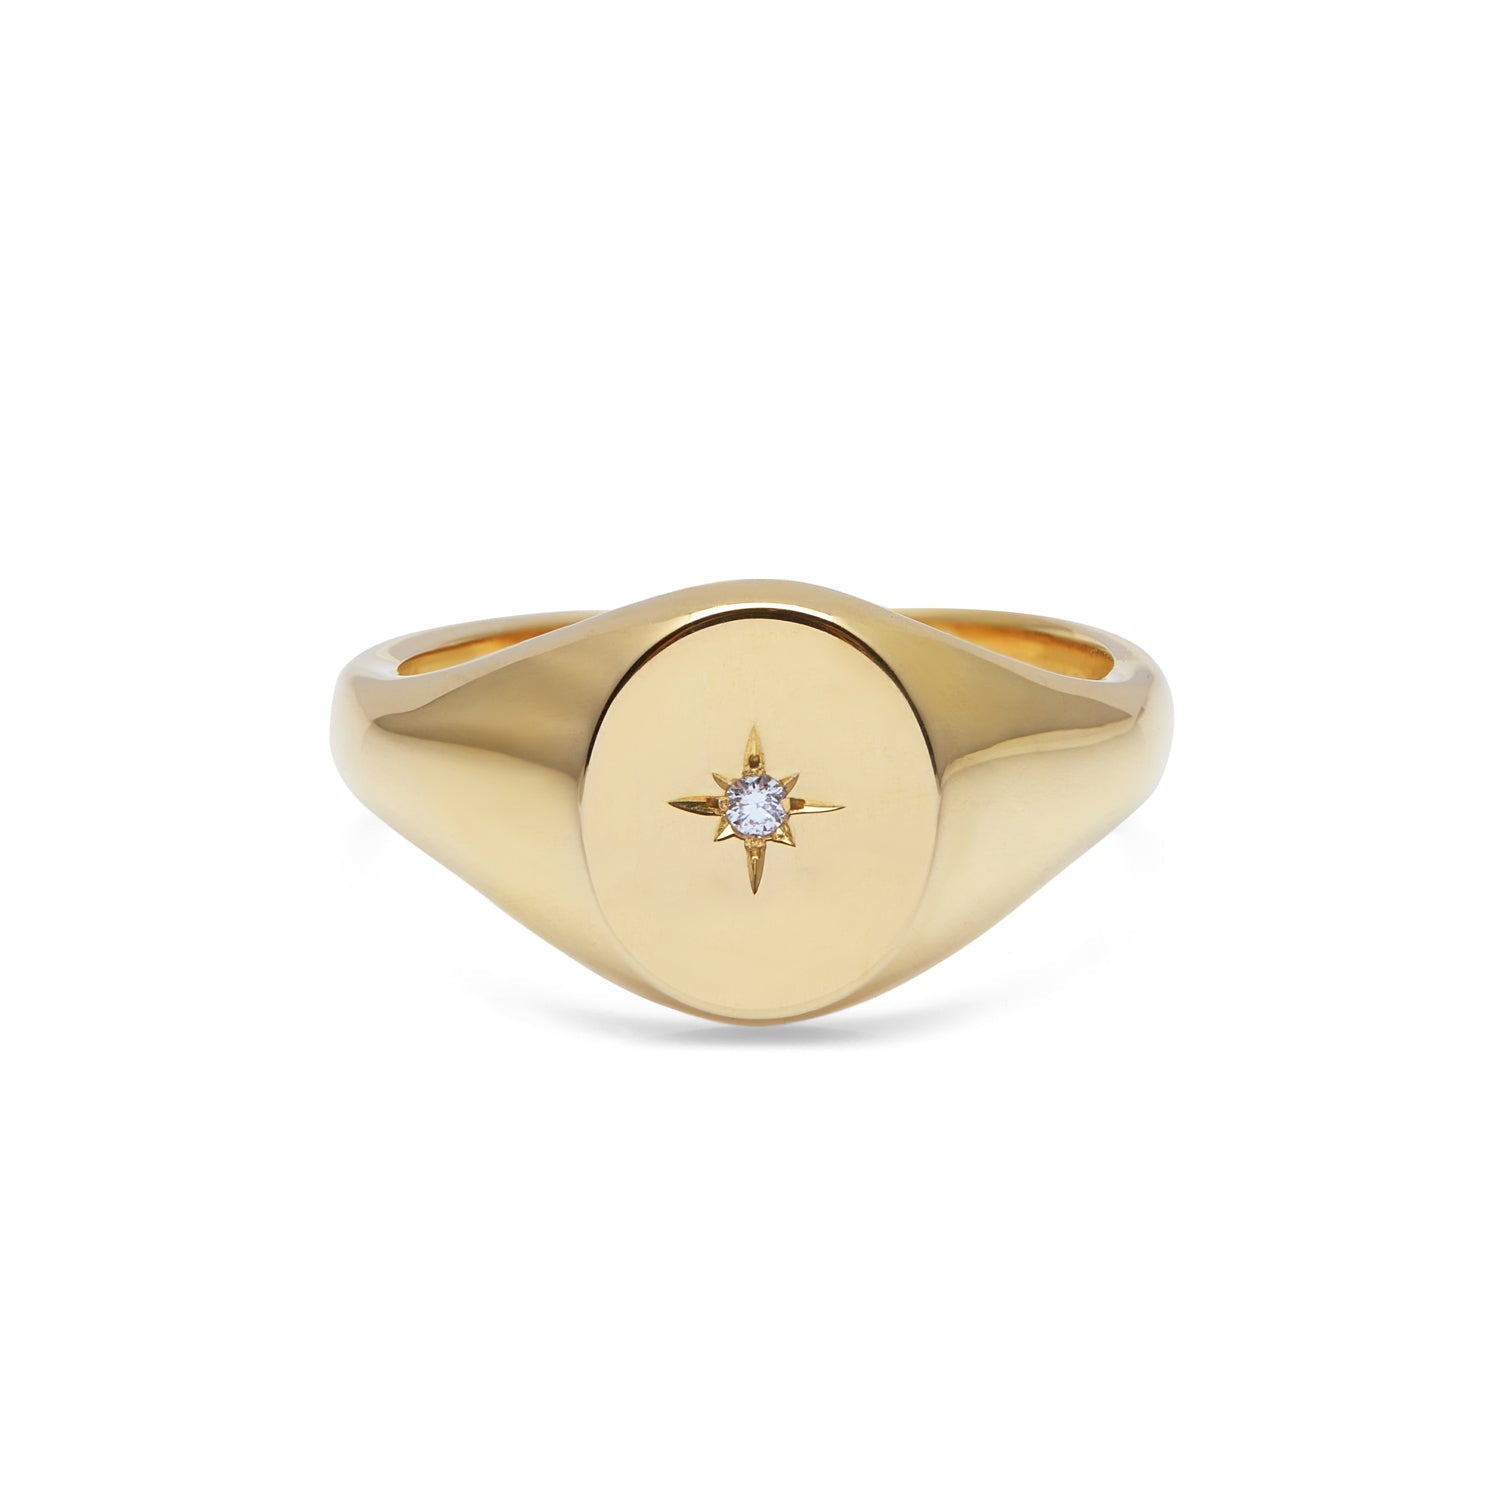 Oval Signet Ring with Star Set Diamond 11x9mm - 18K Yellow Gold